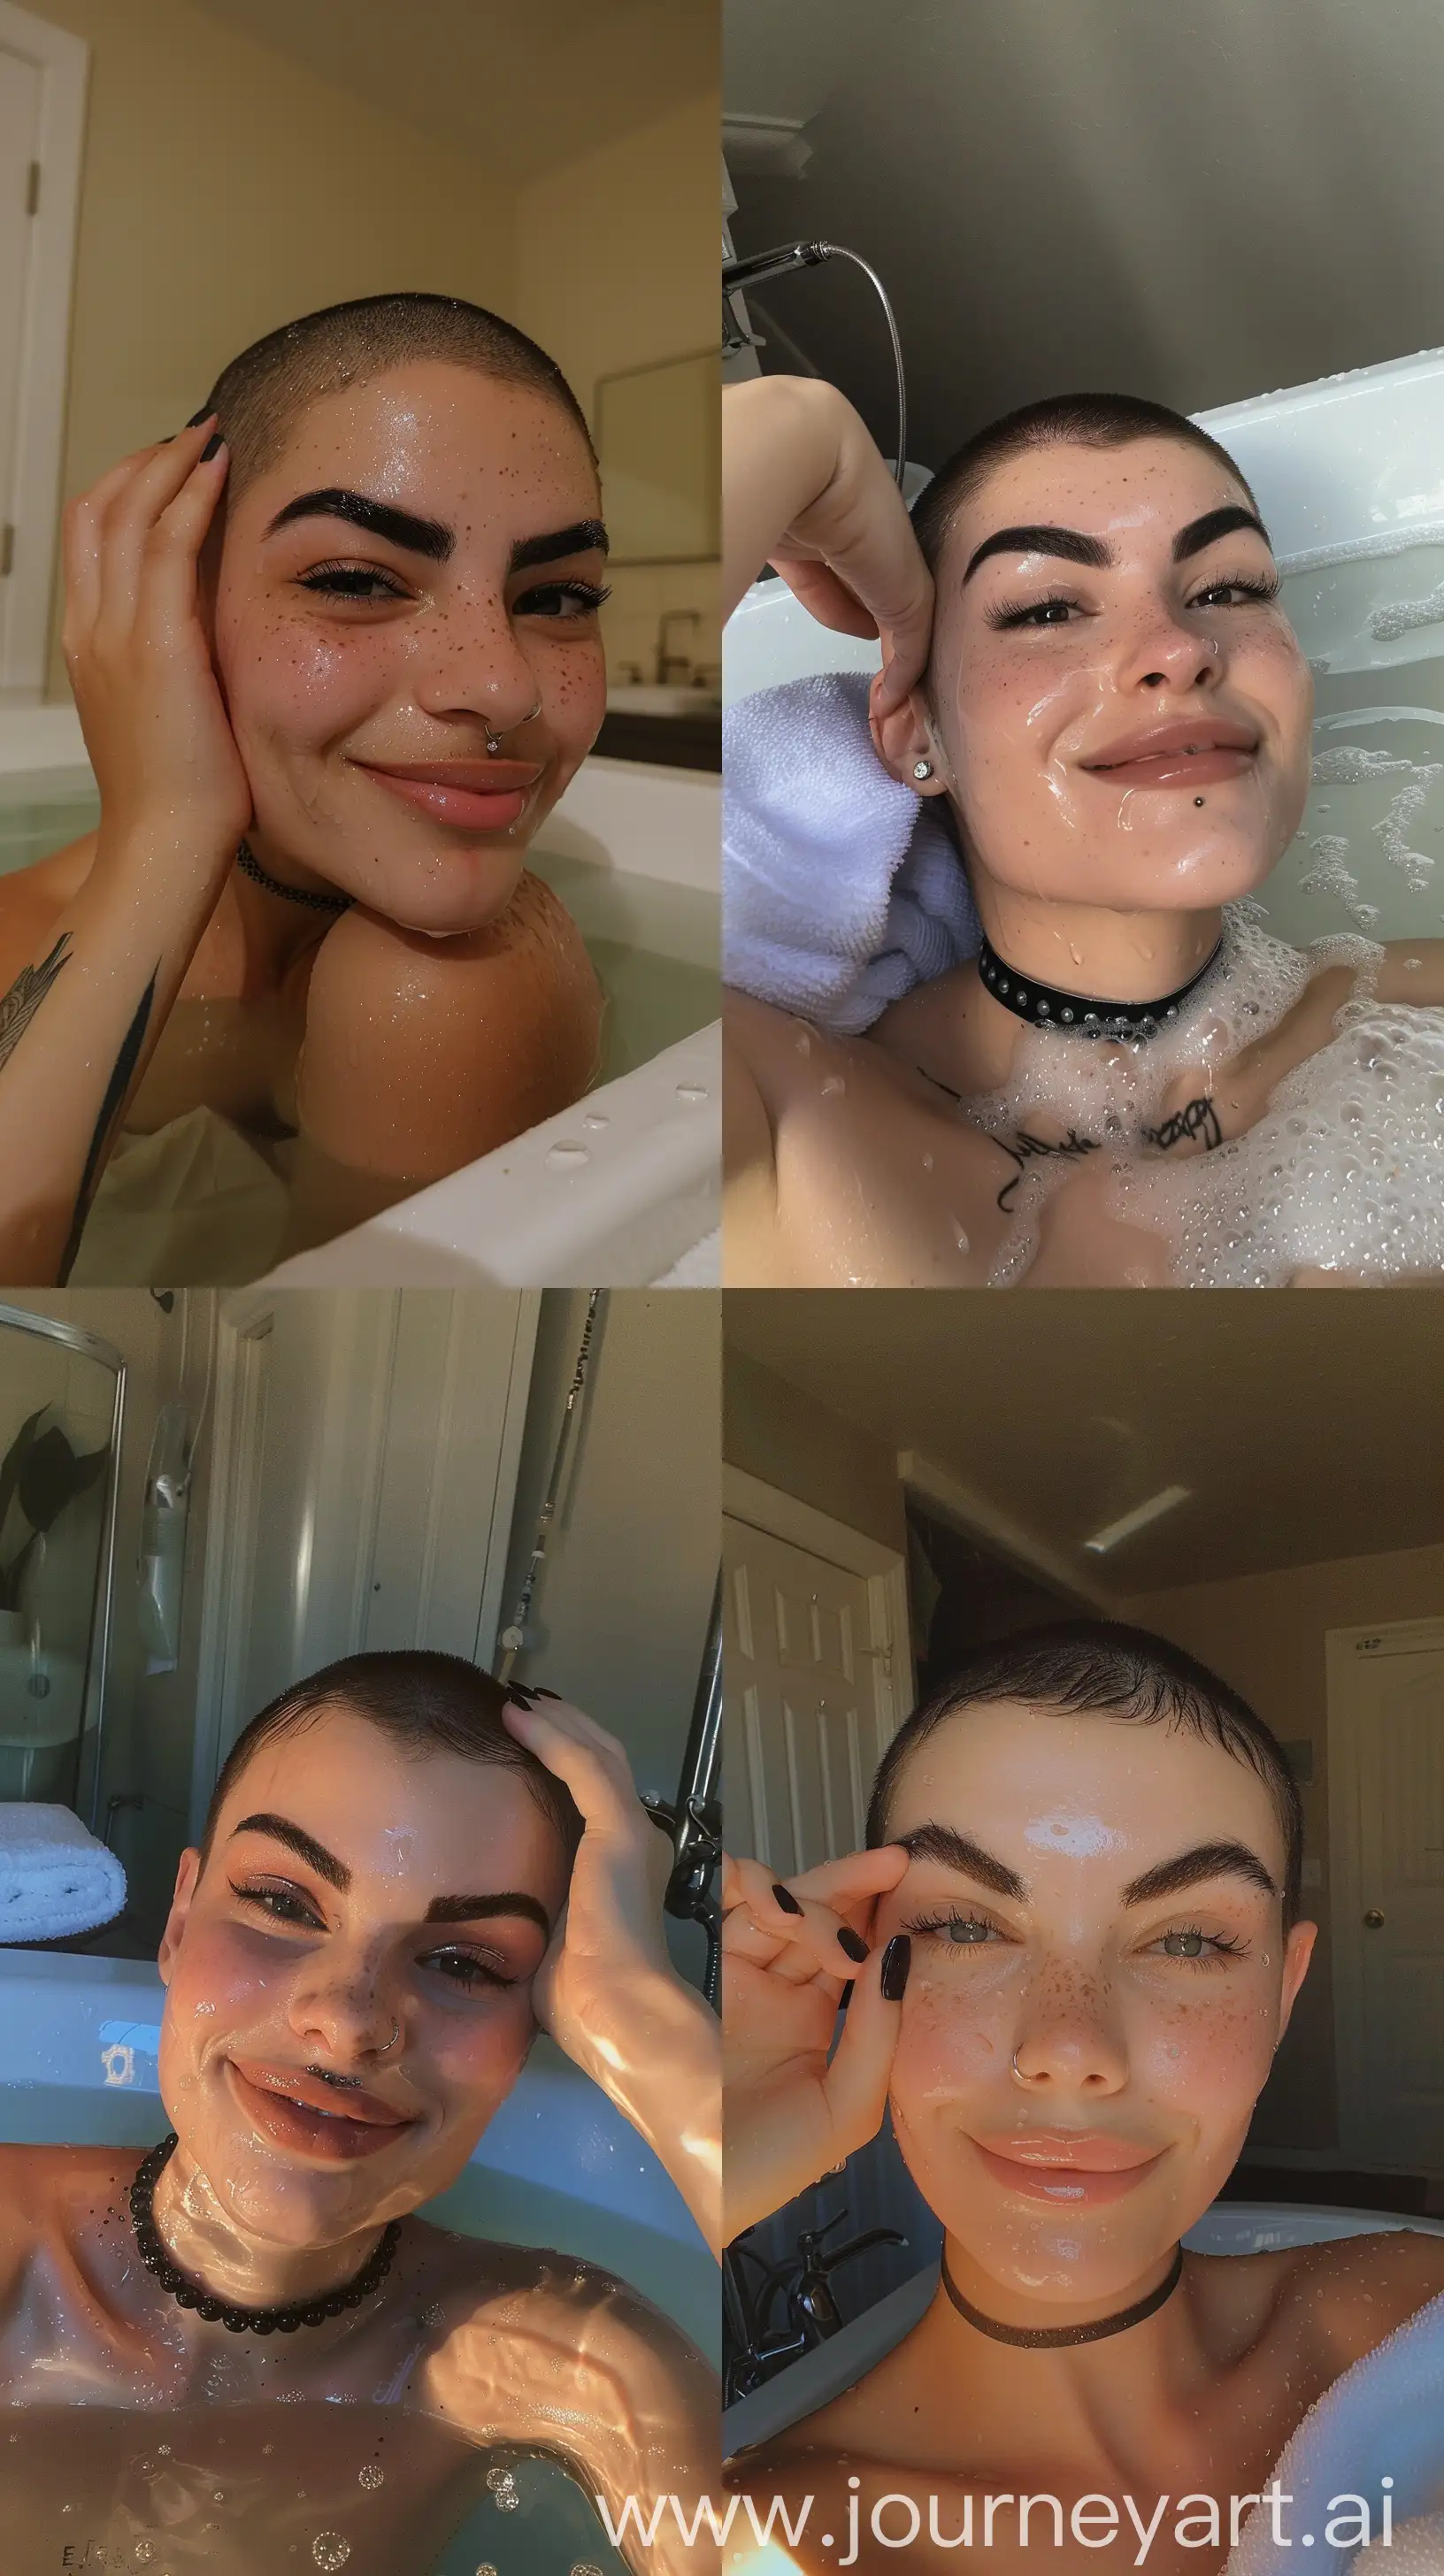 EGirl-Aesthetic-Instagram-Selfie-Smiling-with-Hand-on-Face-by-the-Tub